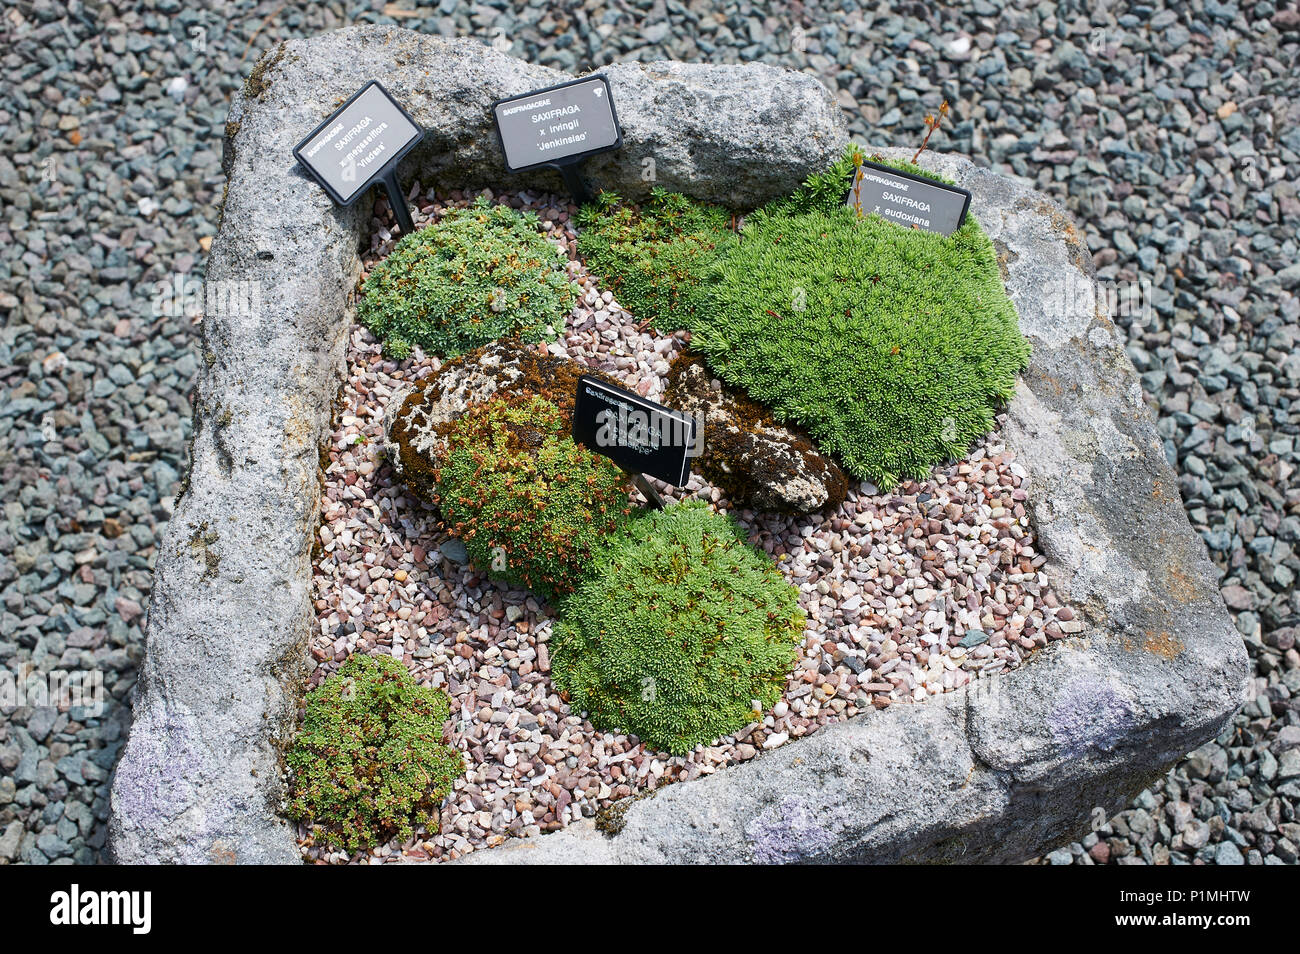 A Group of Saxifrage (rockfoil) growing in an old stone trough Stock Photo